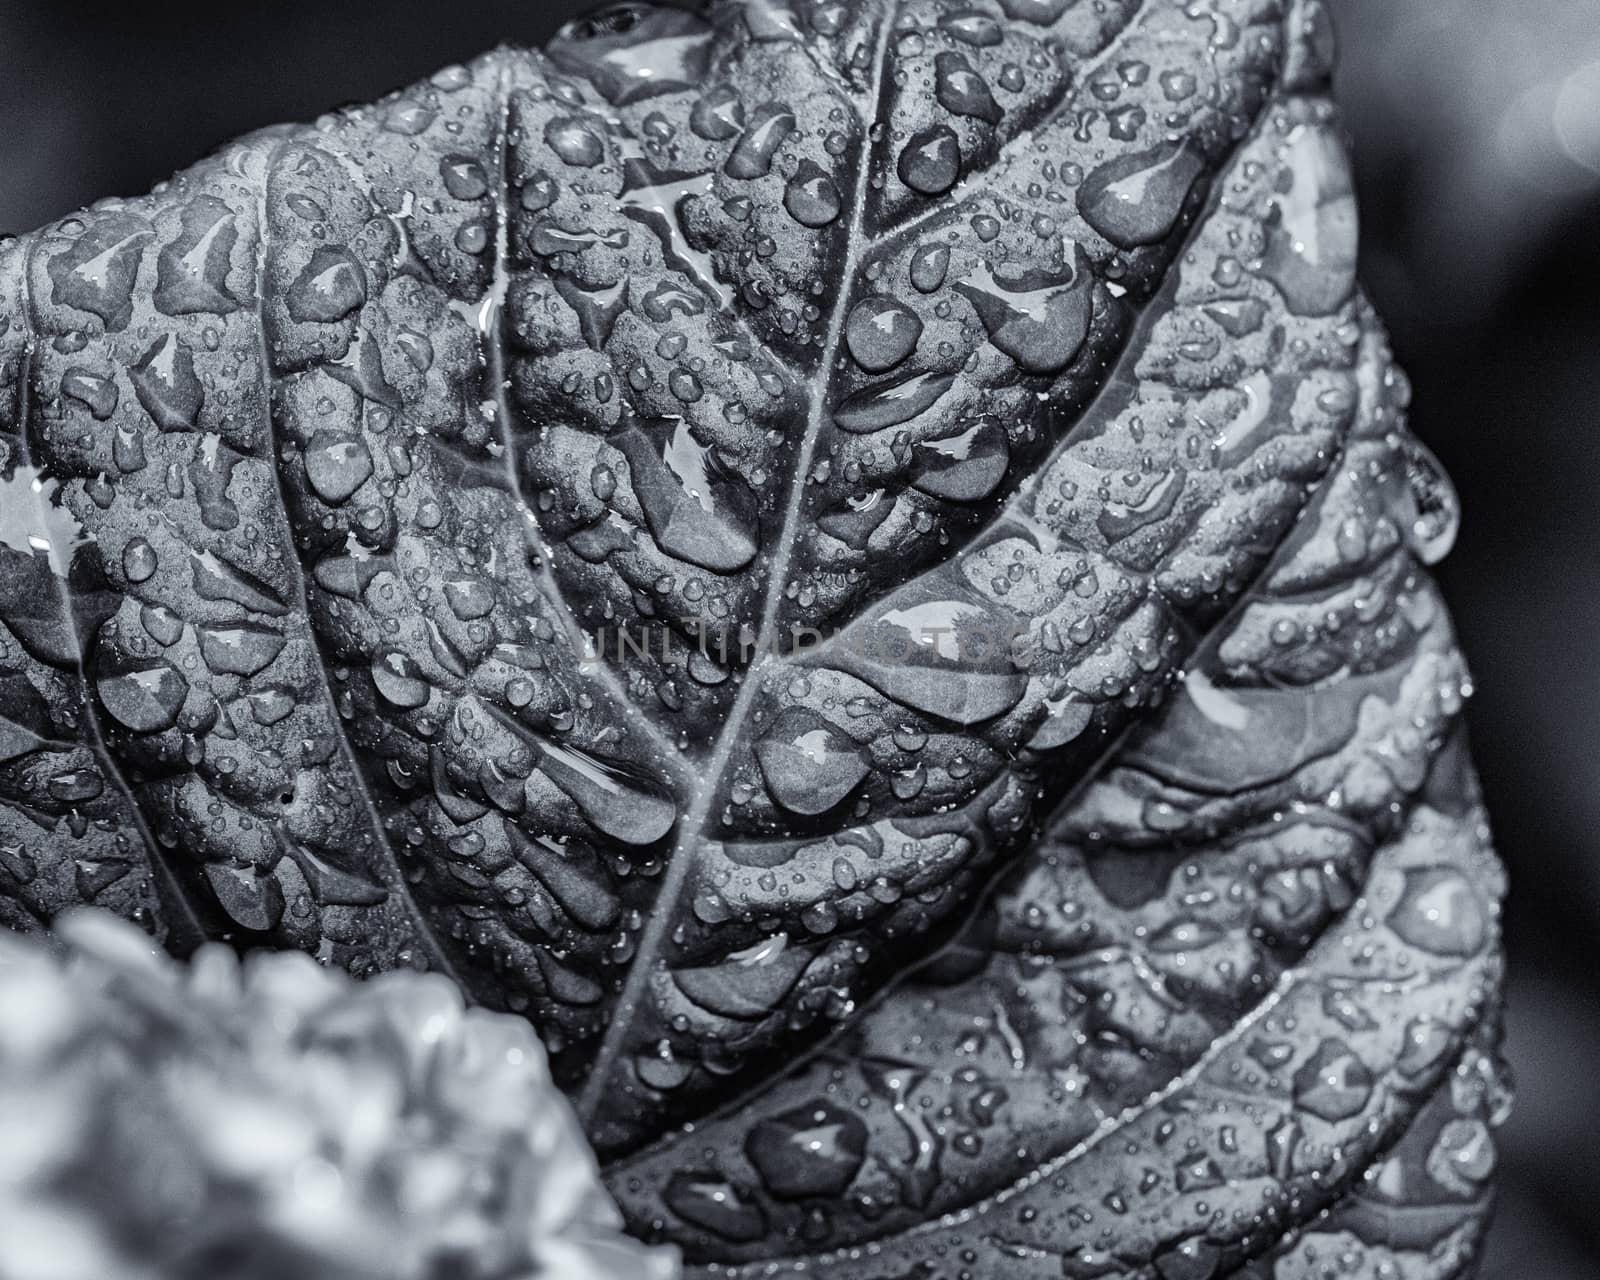 Monochrome View Of Wet Leaf by CharlieFloyd